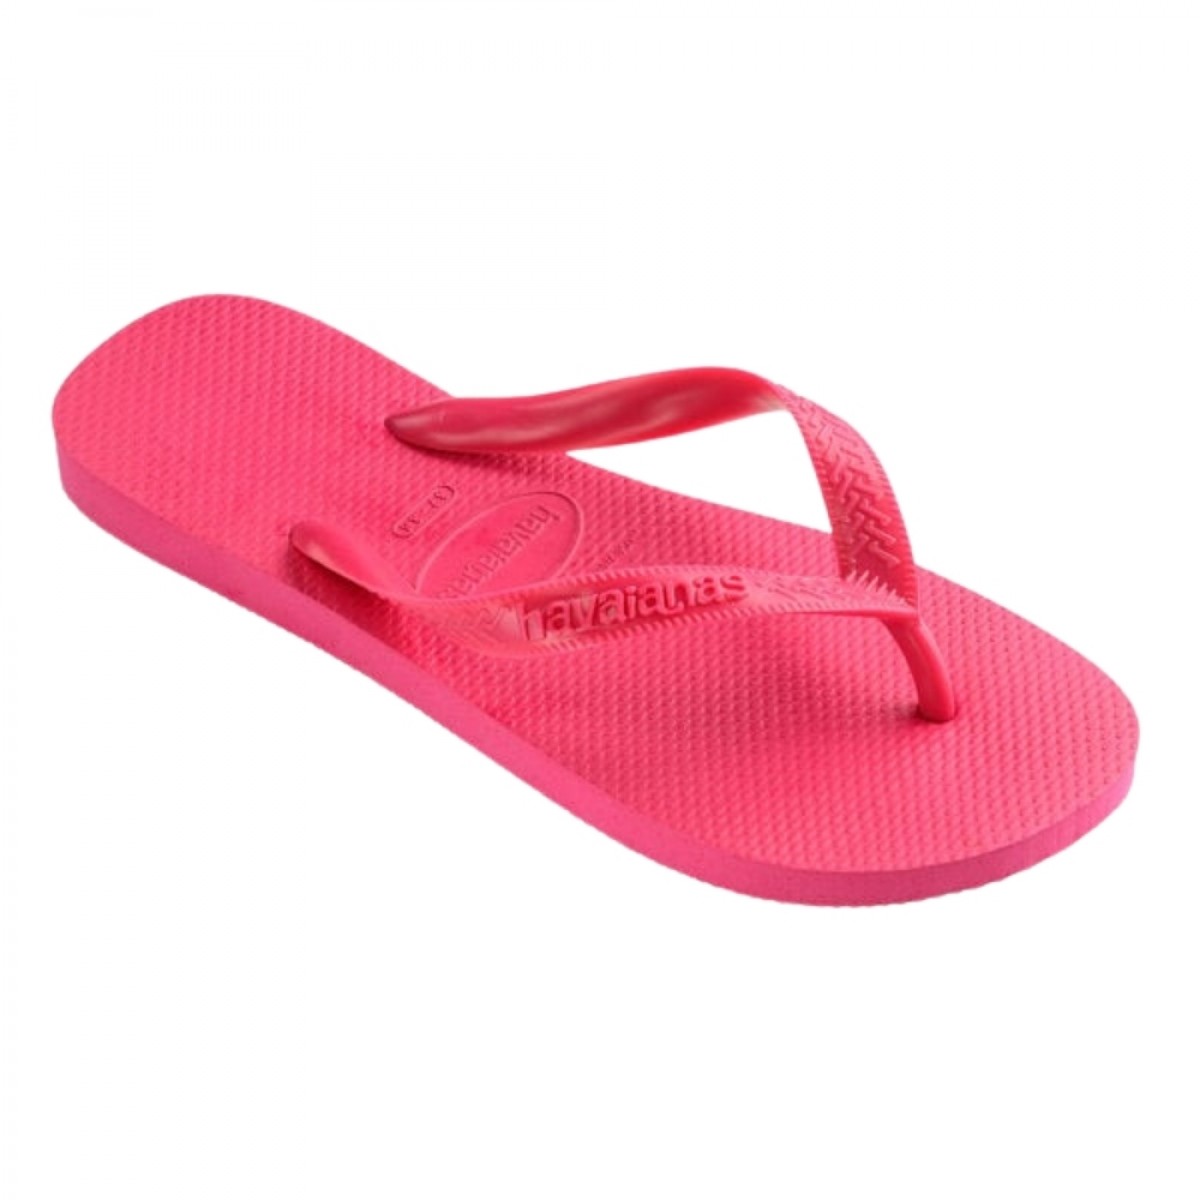 havaianas top - pink electric - fra siden 